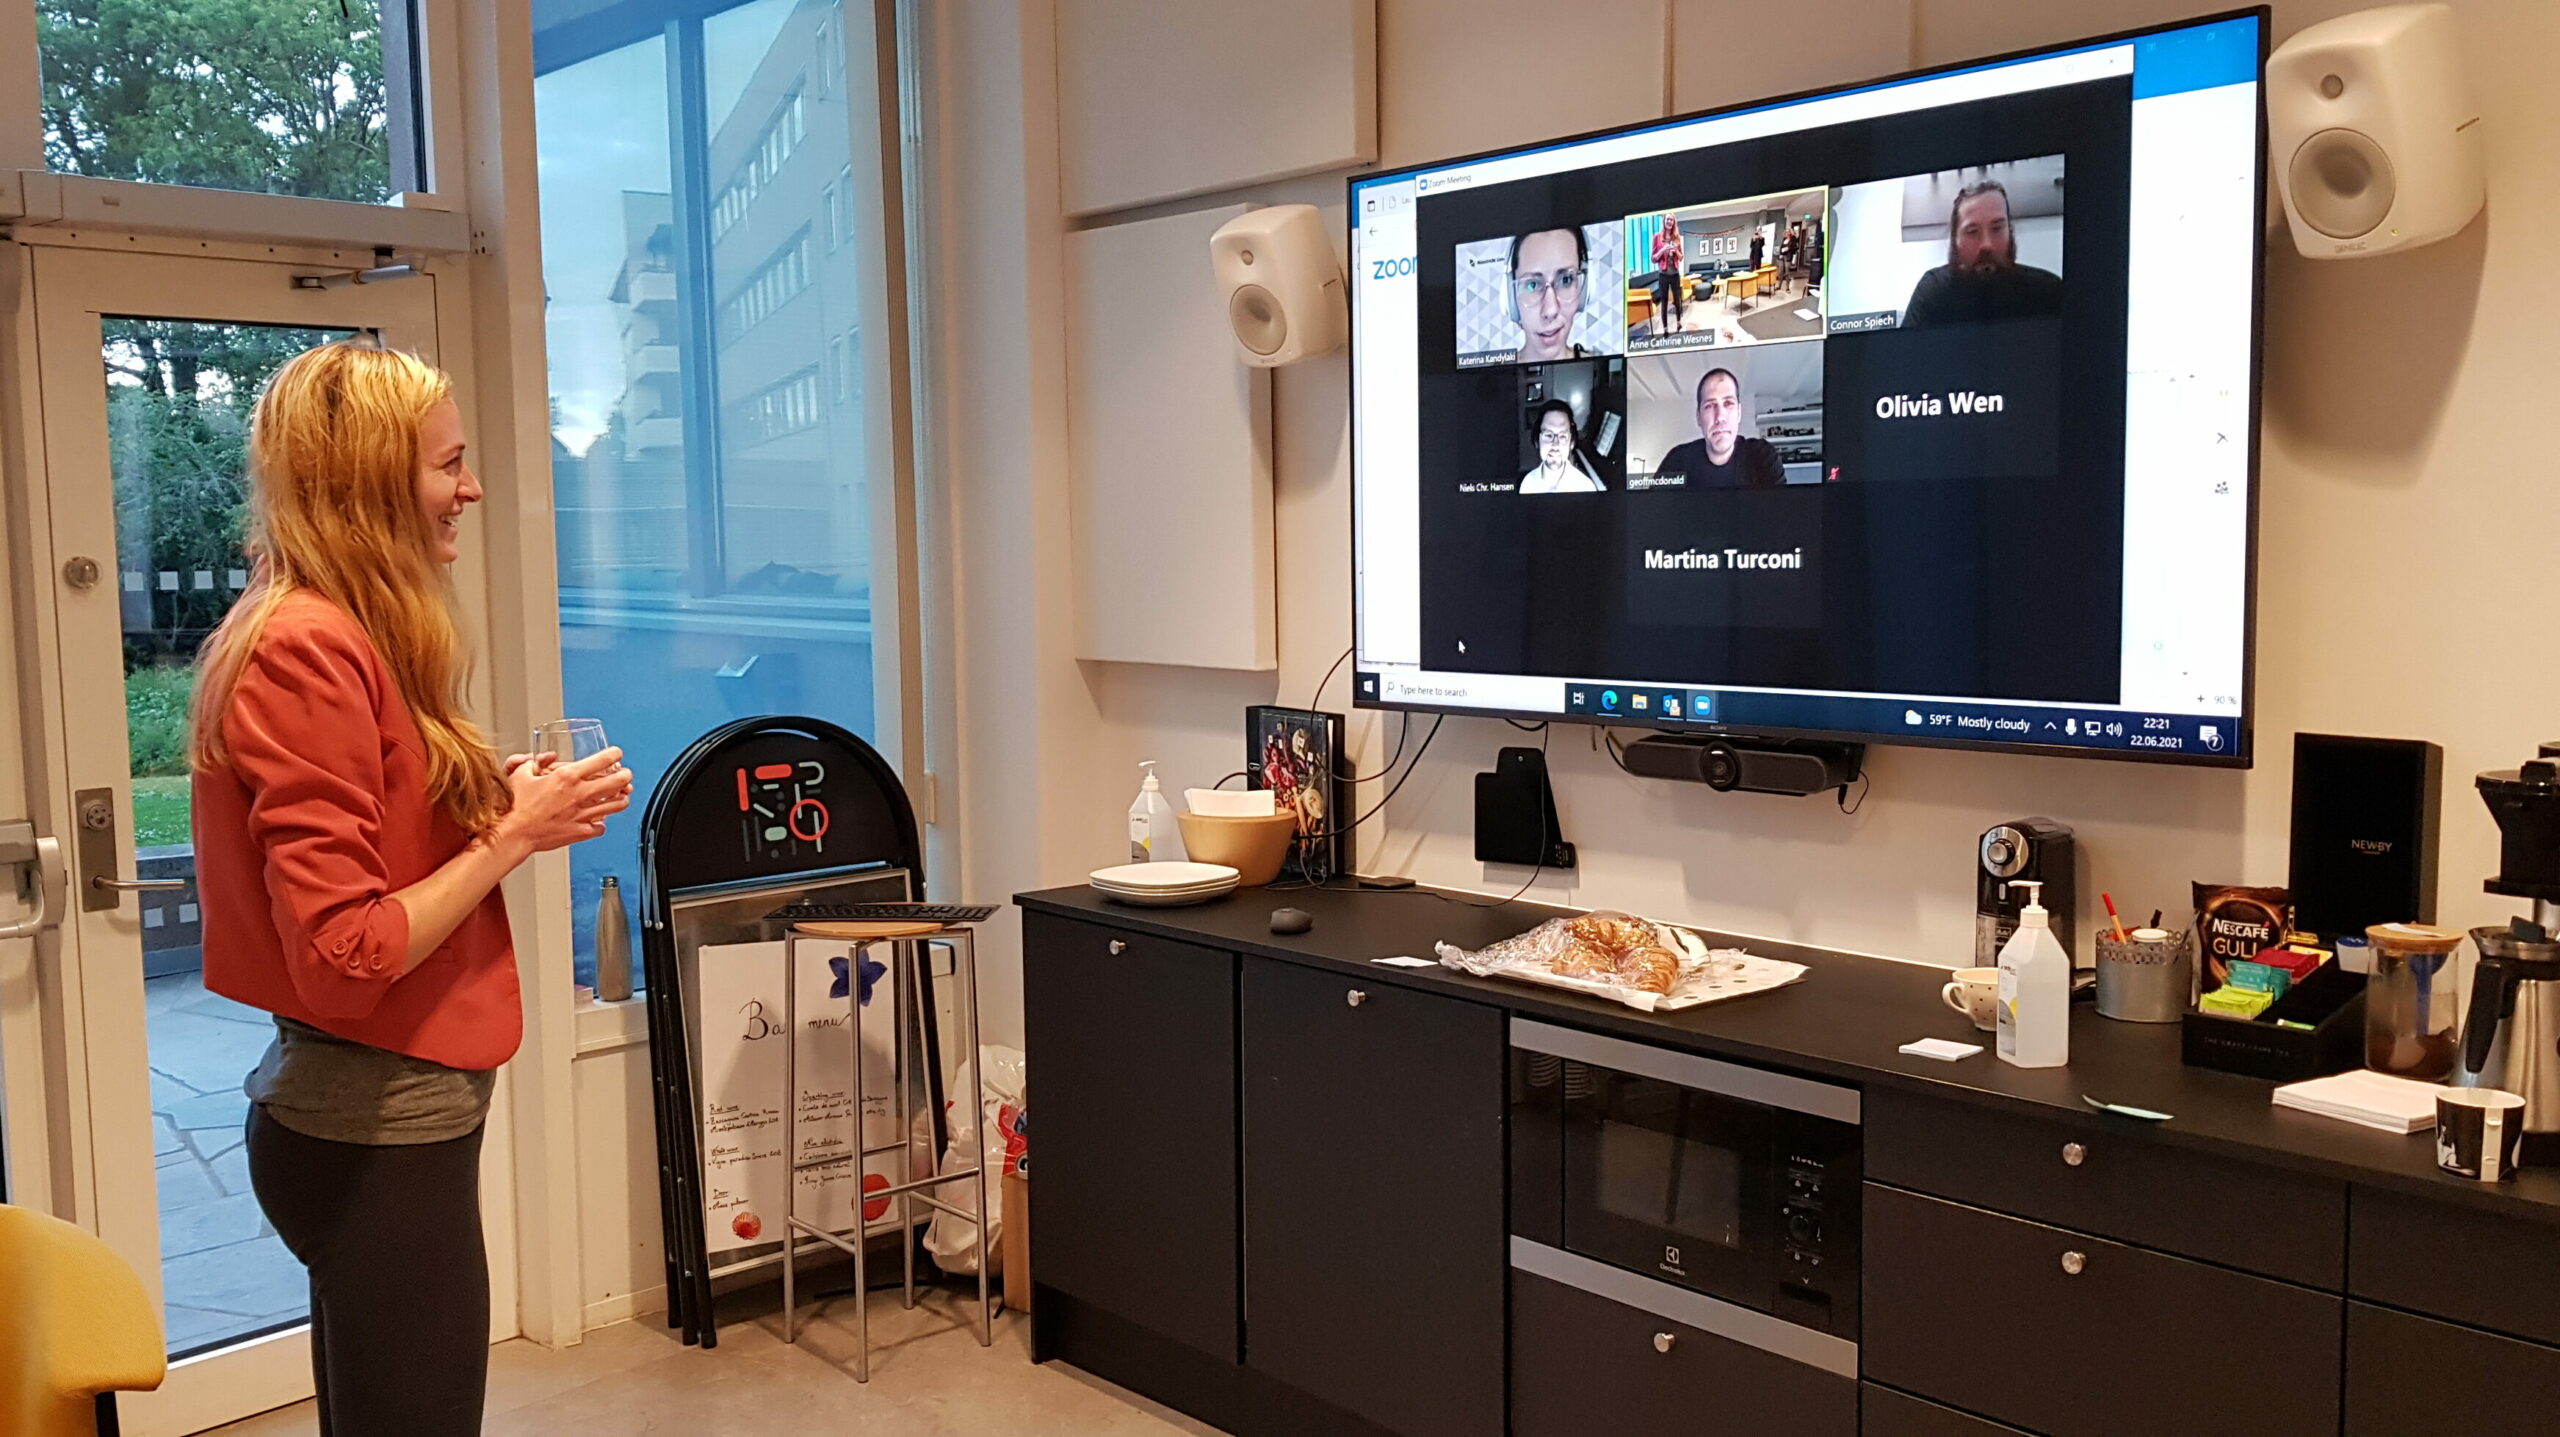 RITMO PhD fellow Dana Swarbrick interacts with some of the online RPPW participants in the physical-virtual Coffee Room. Croissants were only available for on-site participants…